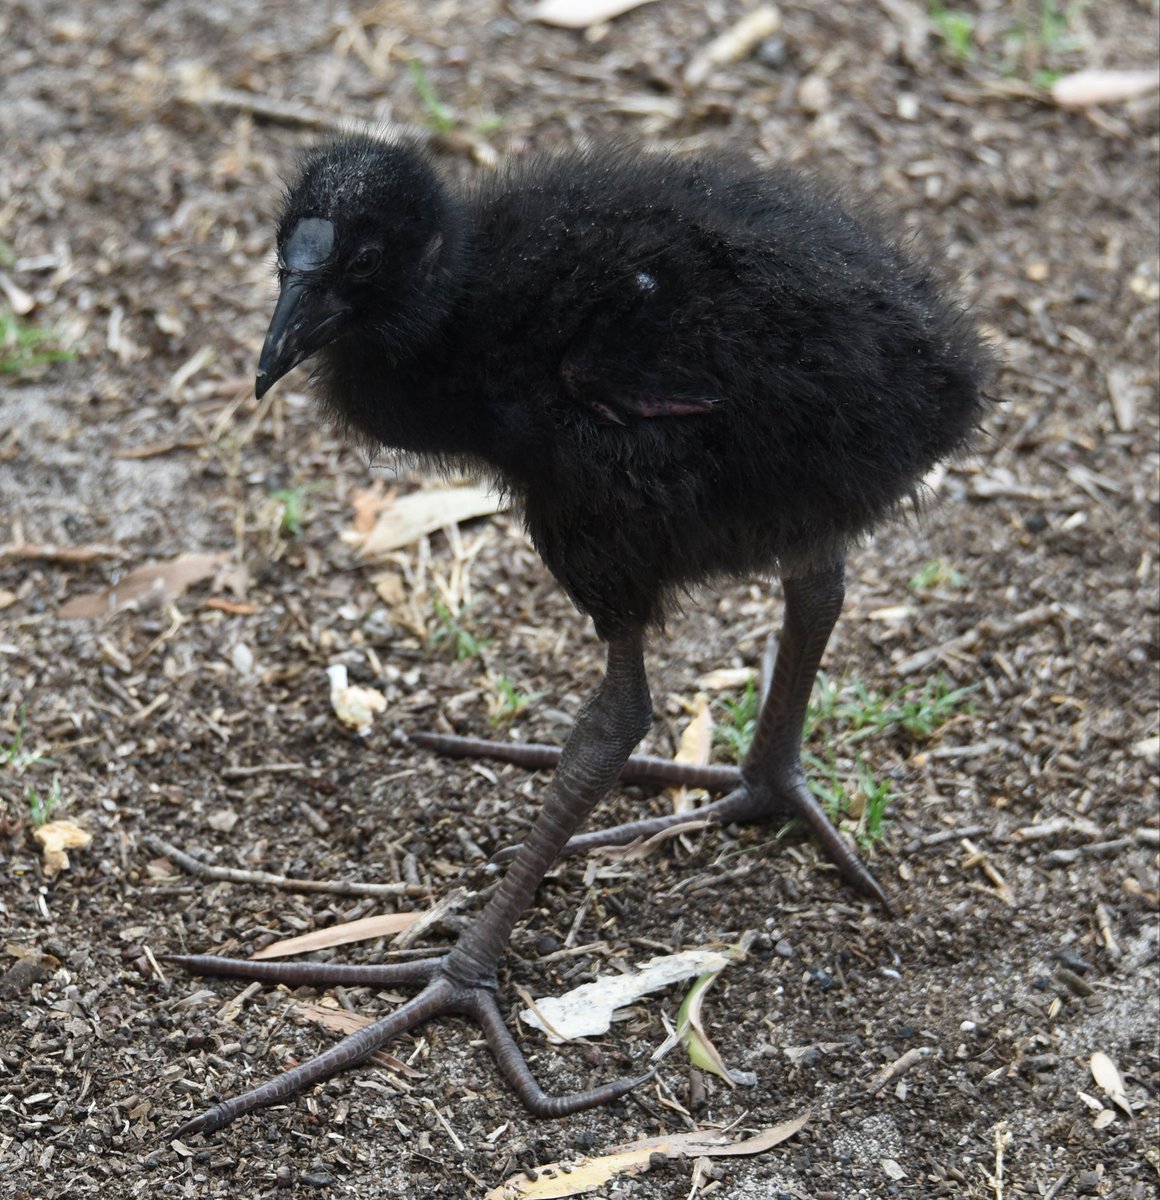 thinking about baby swamphens